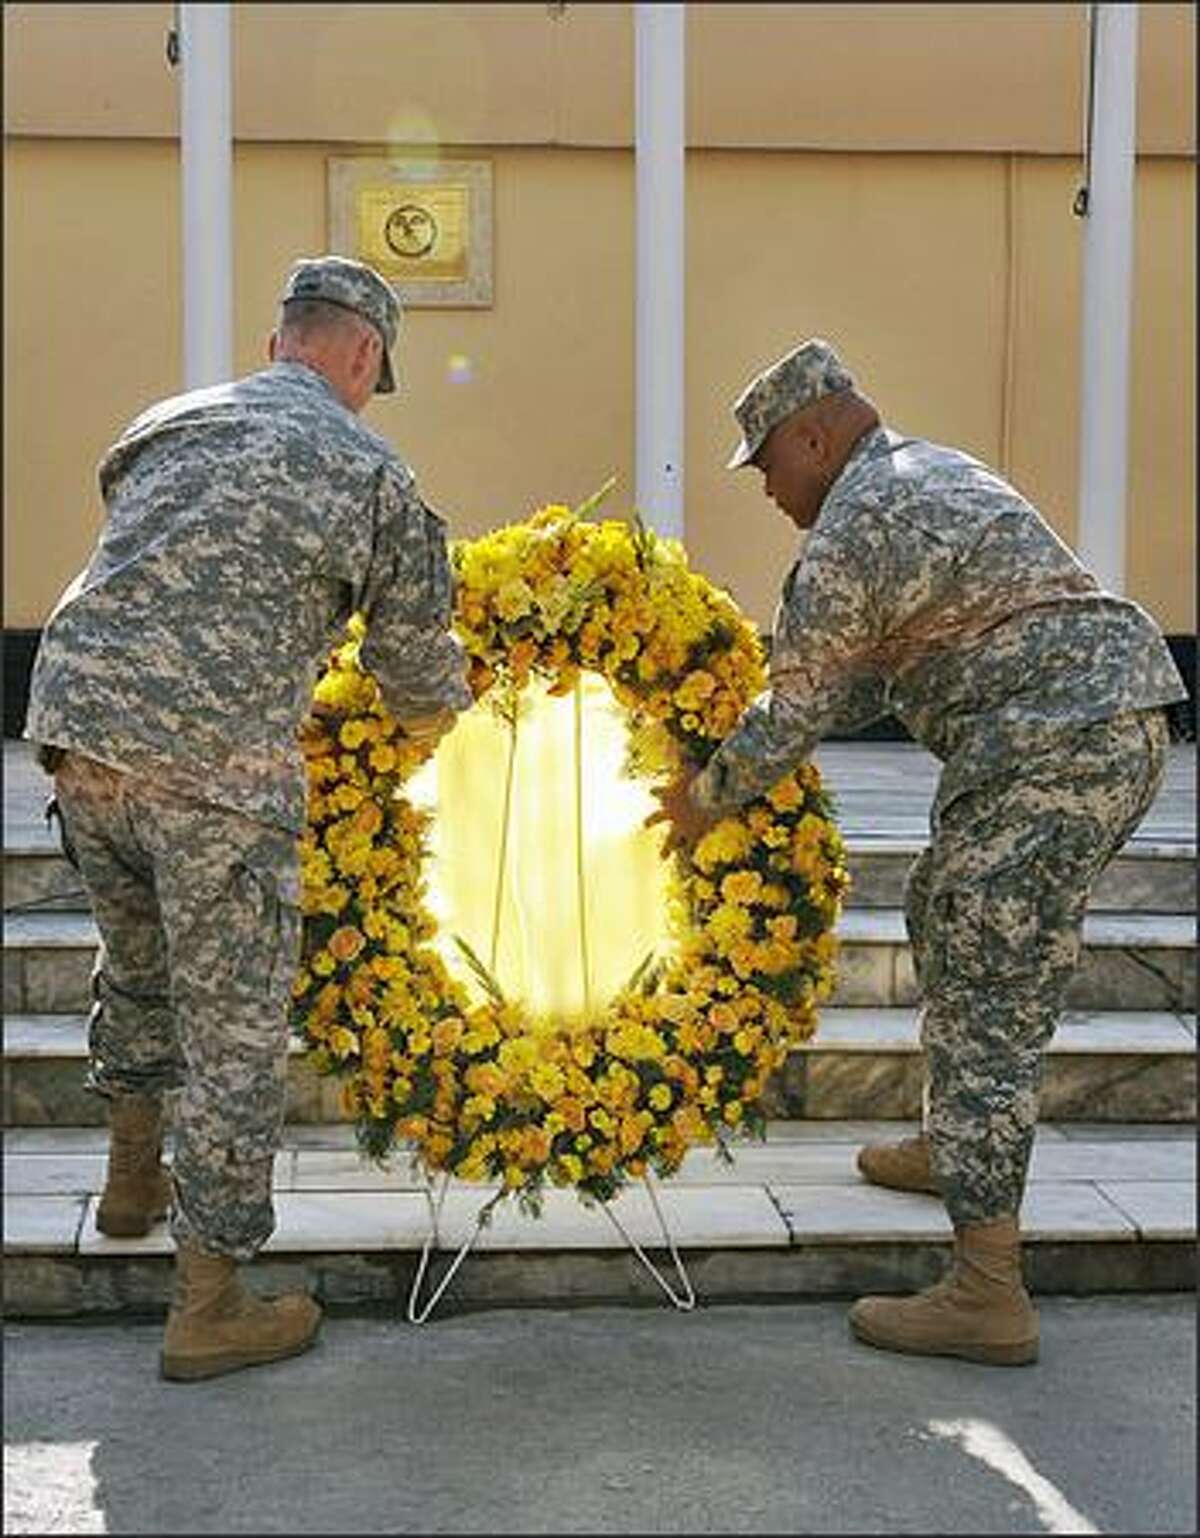 U.S. soldiers lay a wreath during a ceremony for Veterans Day at Camp Eggers in Kabul on Tuesday.